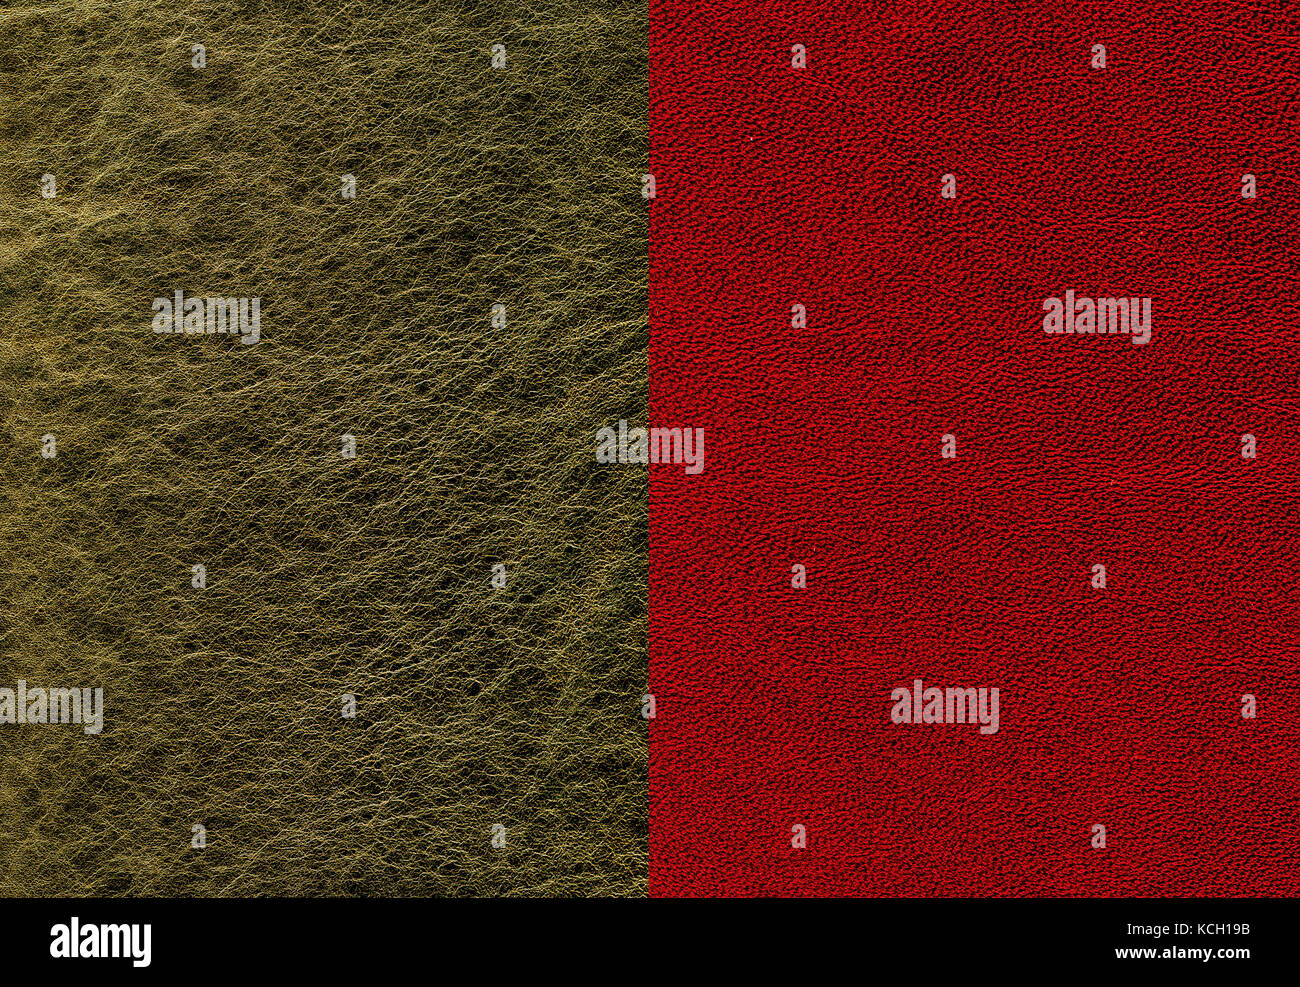 Set of glitter grained olive and strong red leather textures Stock Photo